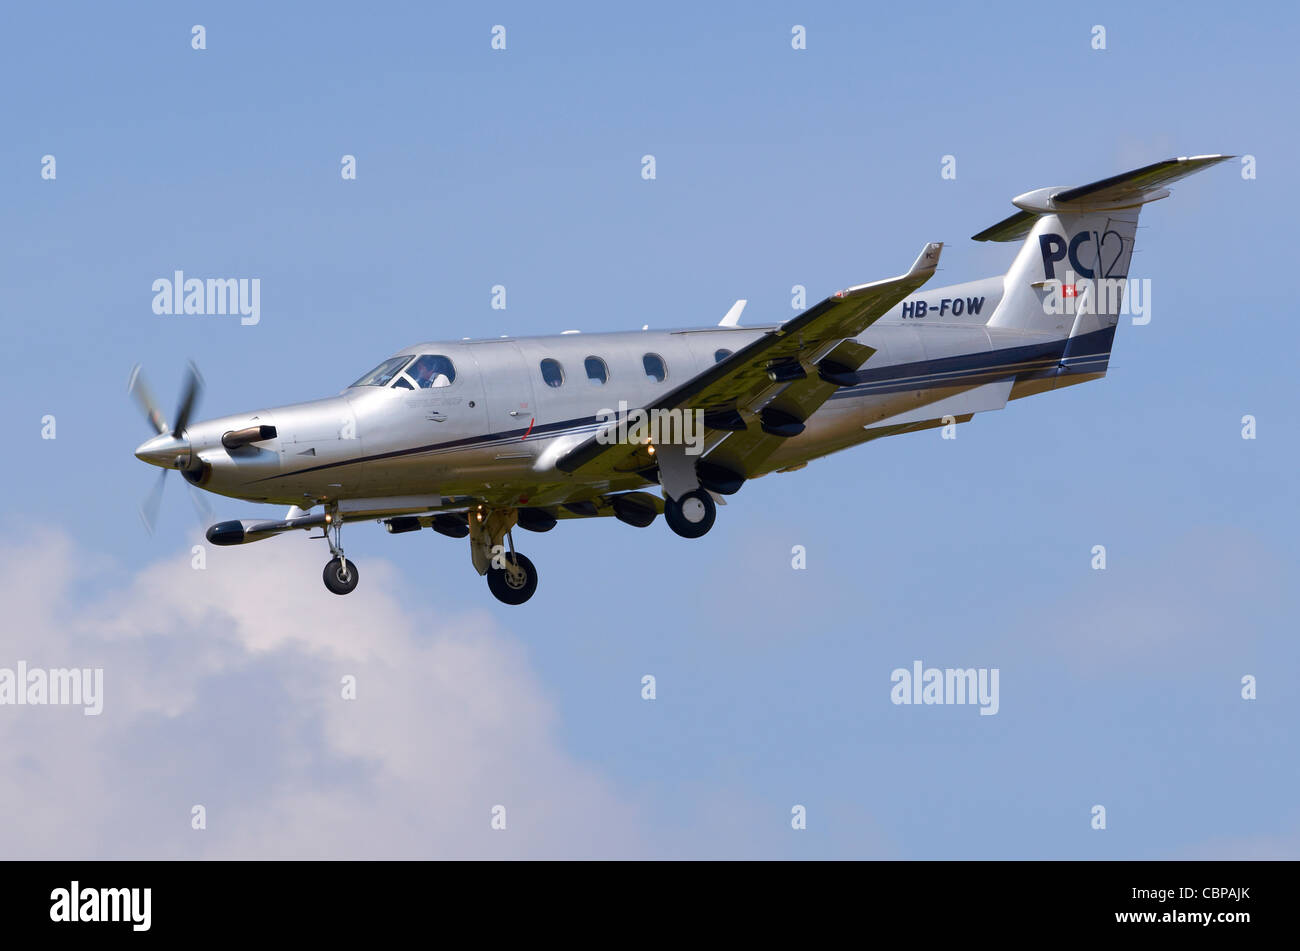 Pilatus PC-12 on approach for landing at RAF Fairford, UK Stock Photo